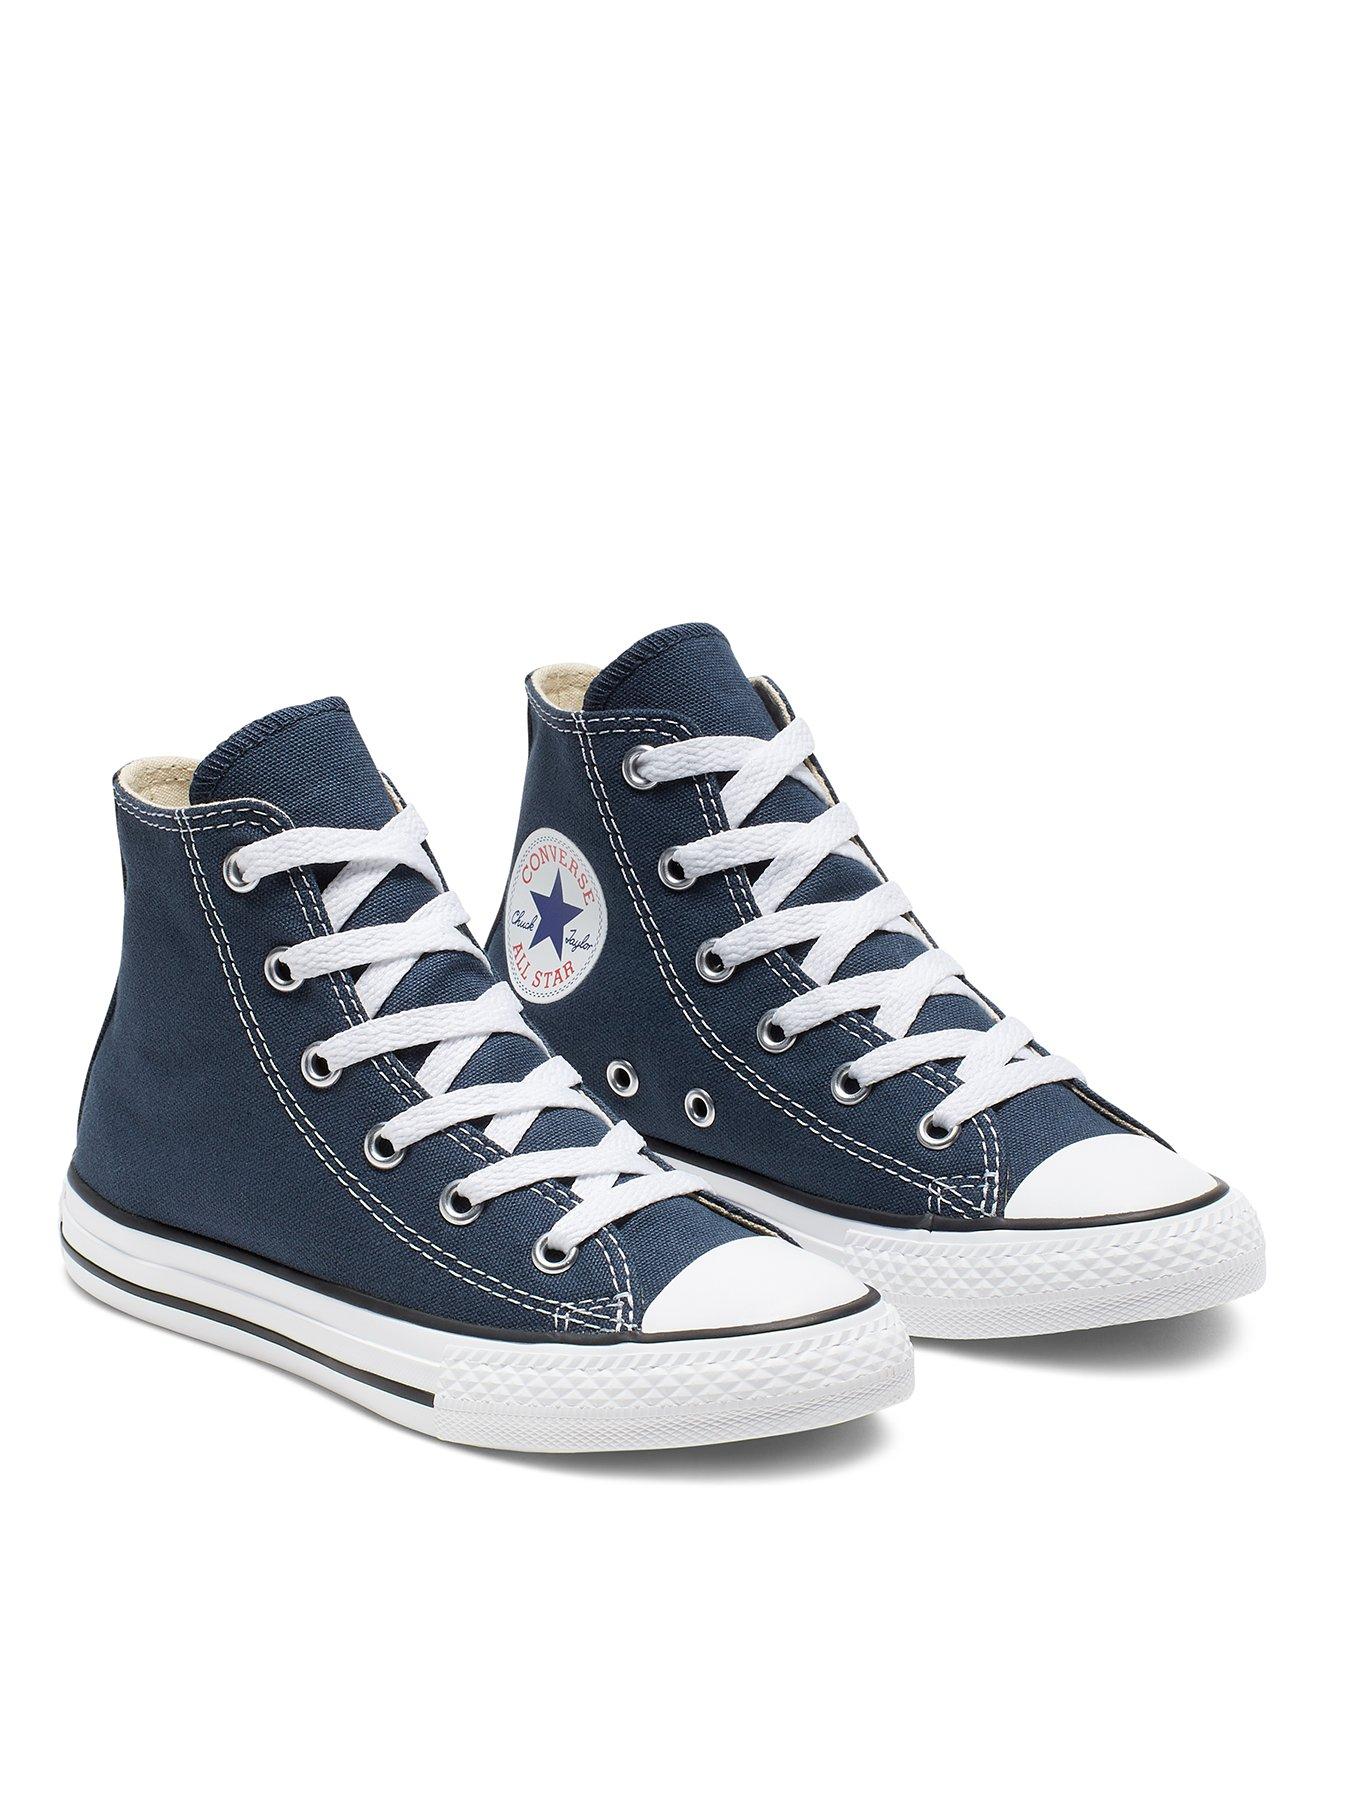 converse kids trainers